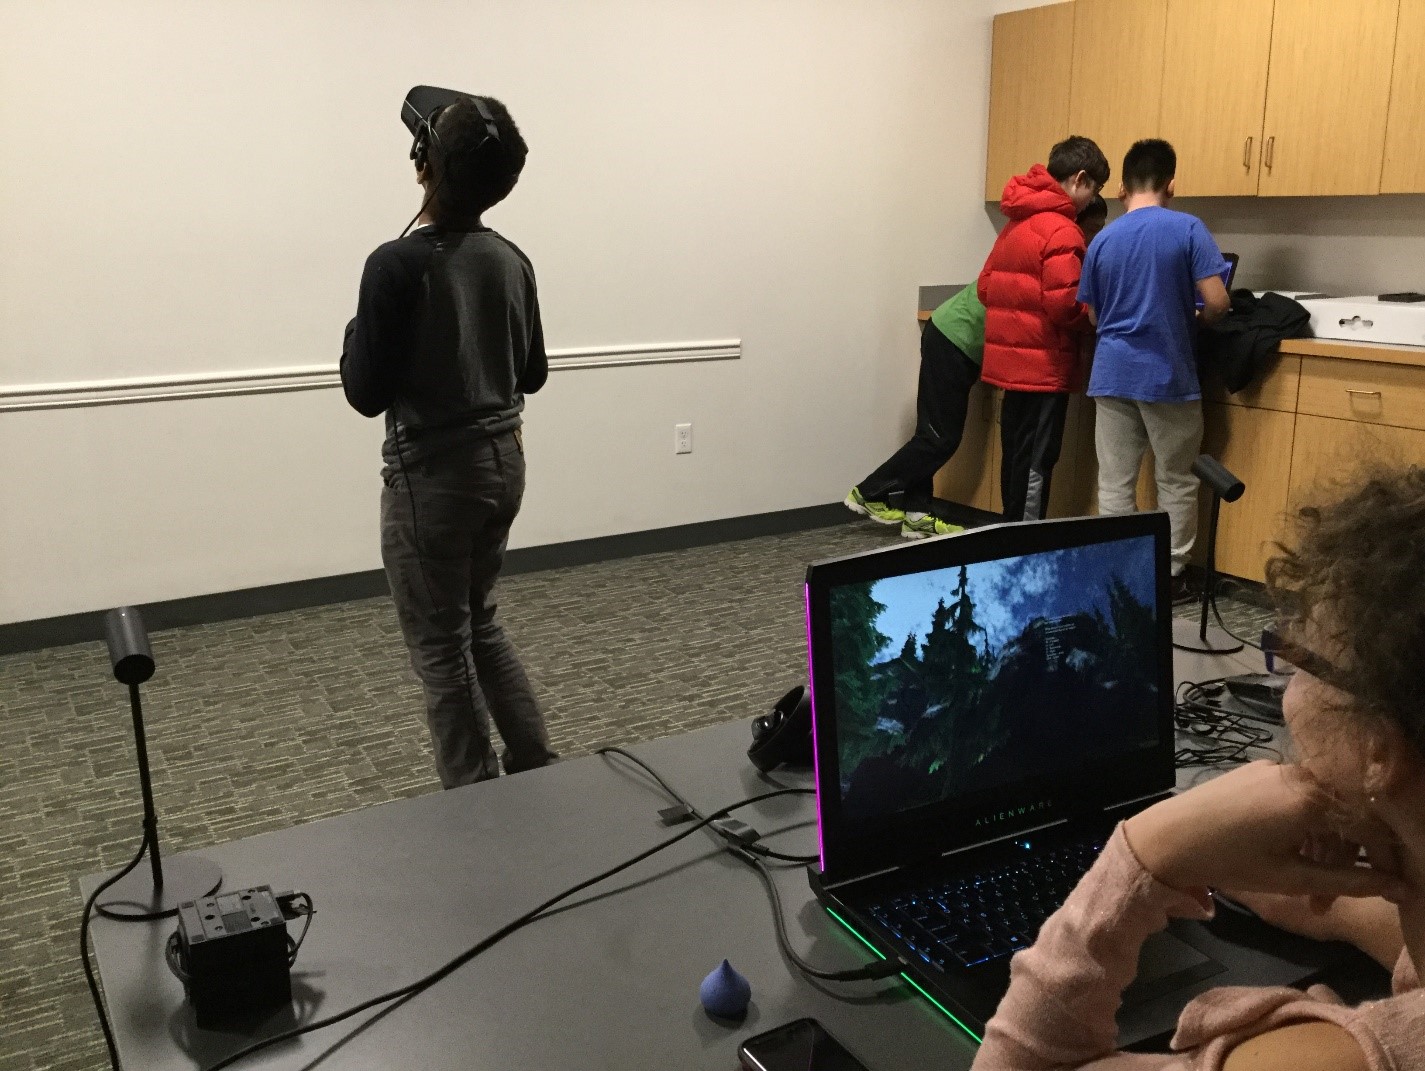 Teens trying out the virtual reality relaxation environment created by Team Dream at Levels. (Photo courtesy of the Great Neck Library)